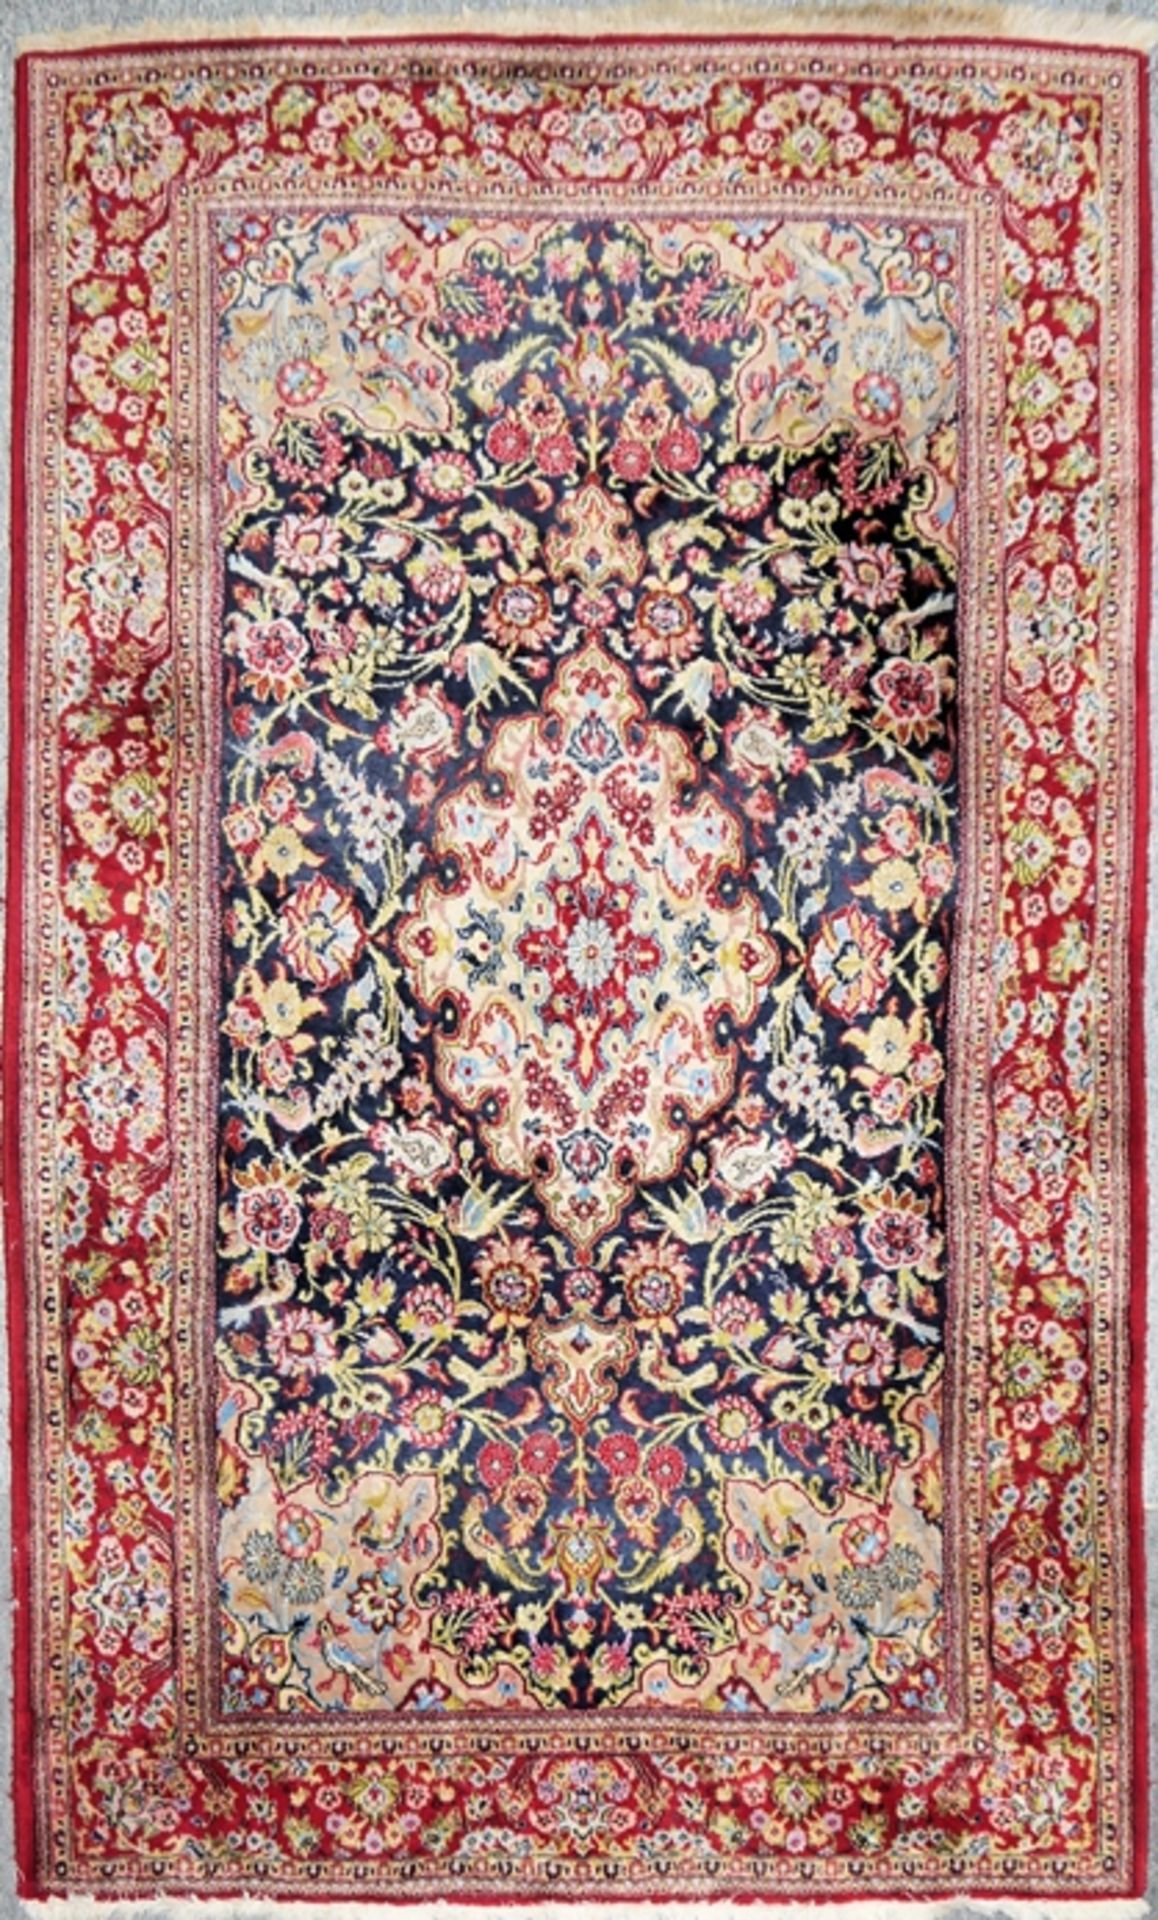 Oriental carpet and runner, Persia, approx. 50 years old